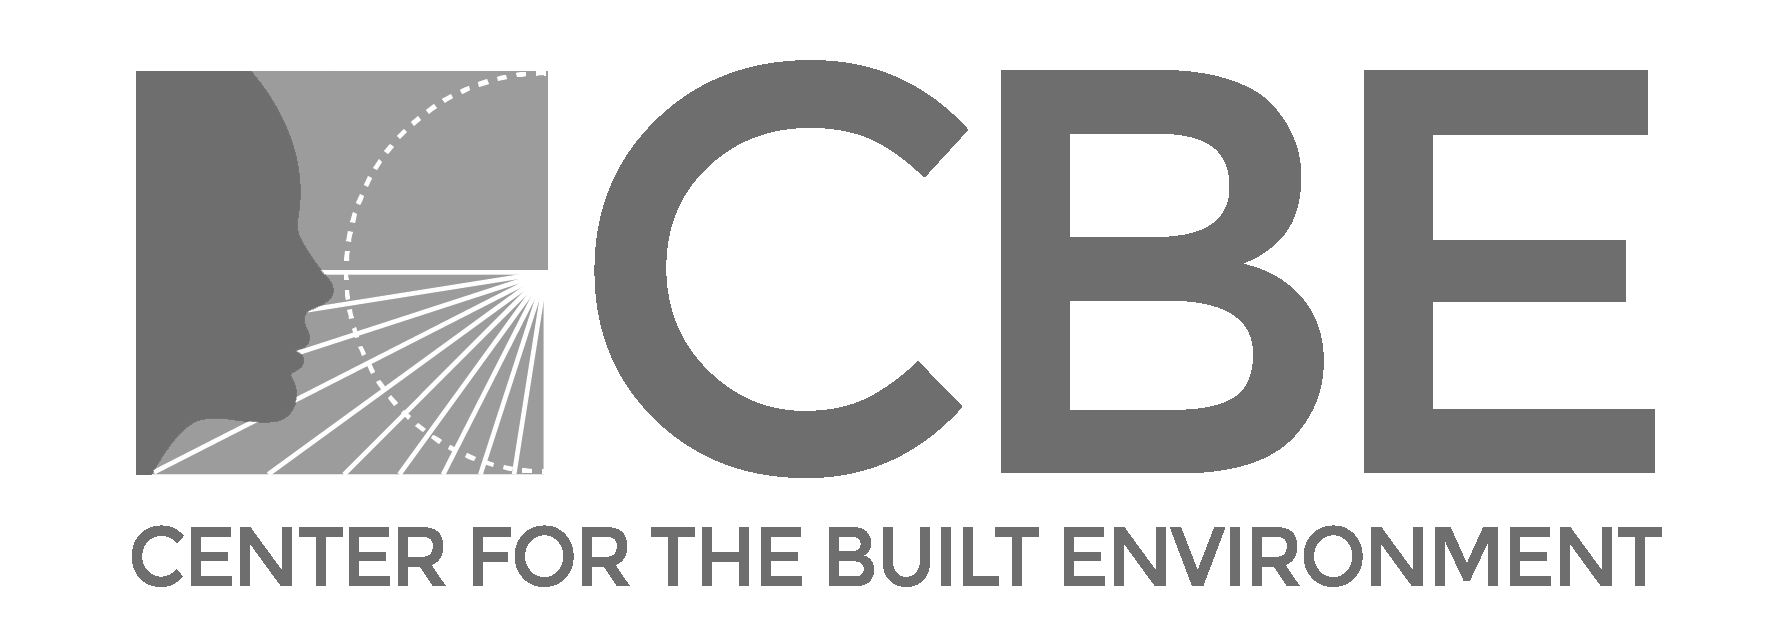 Logo of the Center for the Built Environment